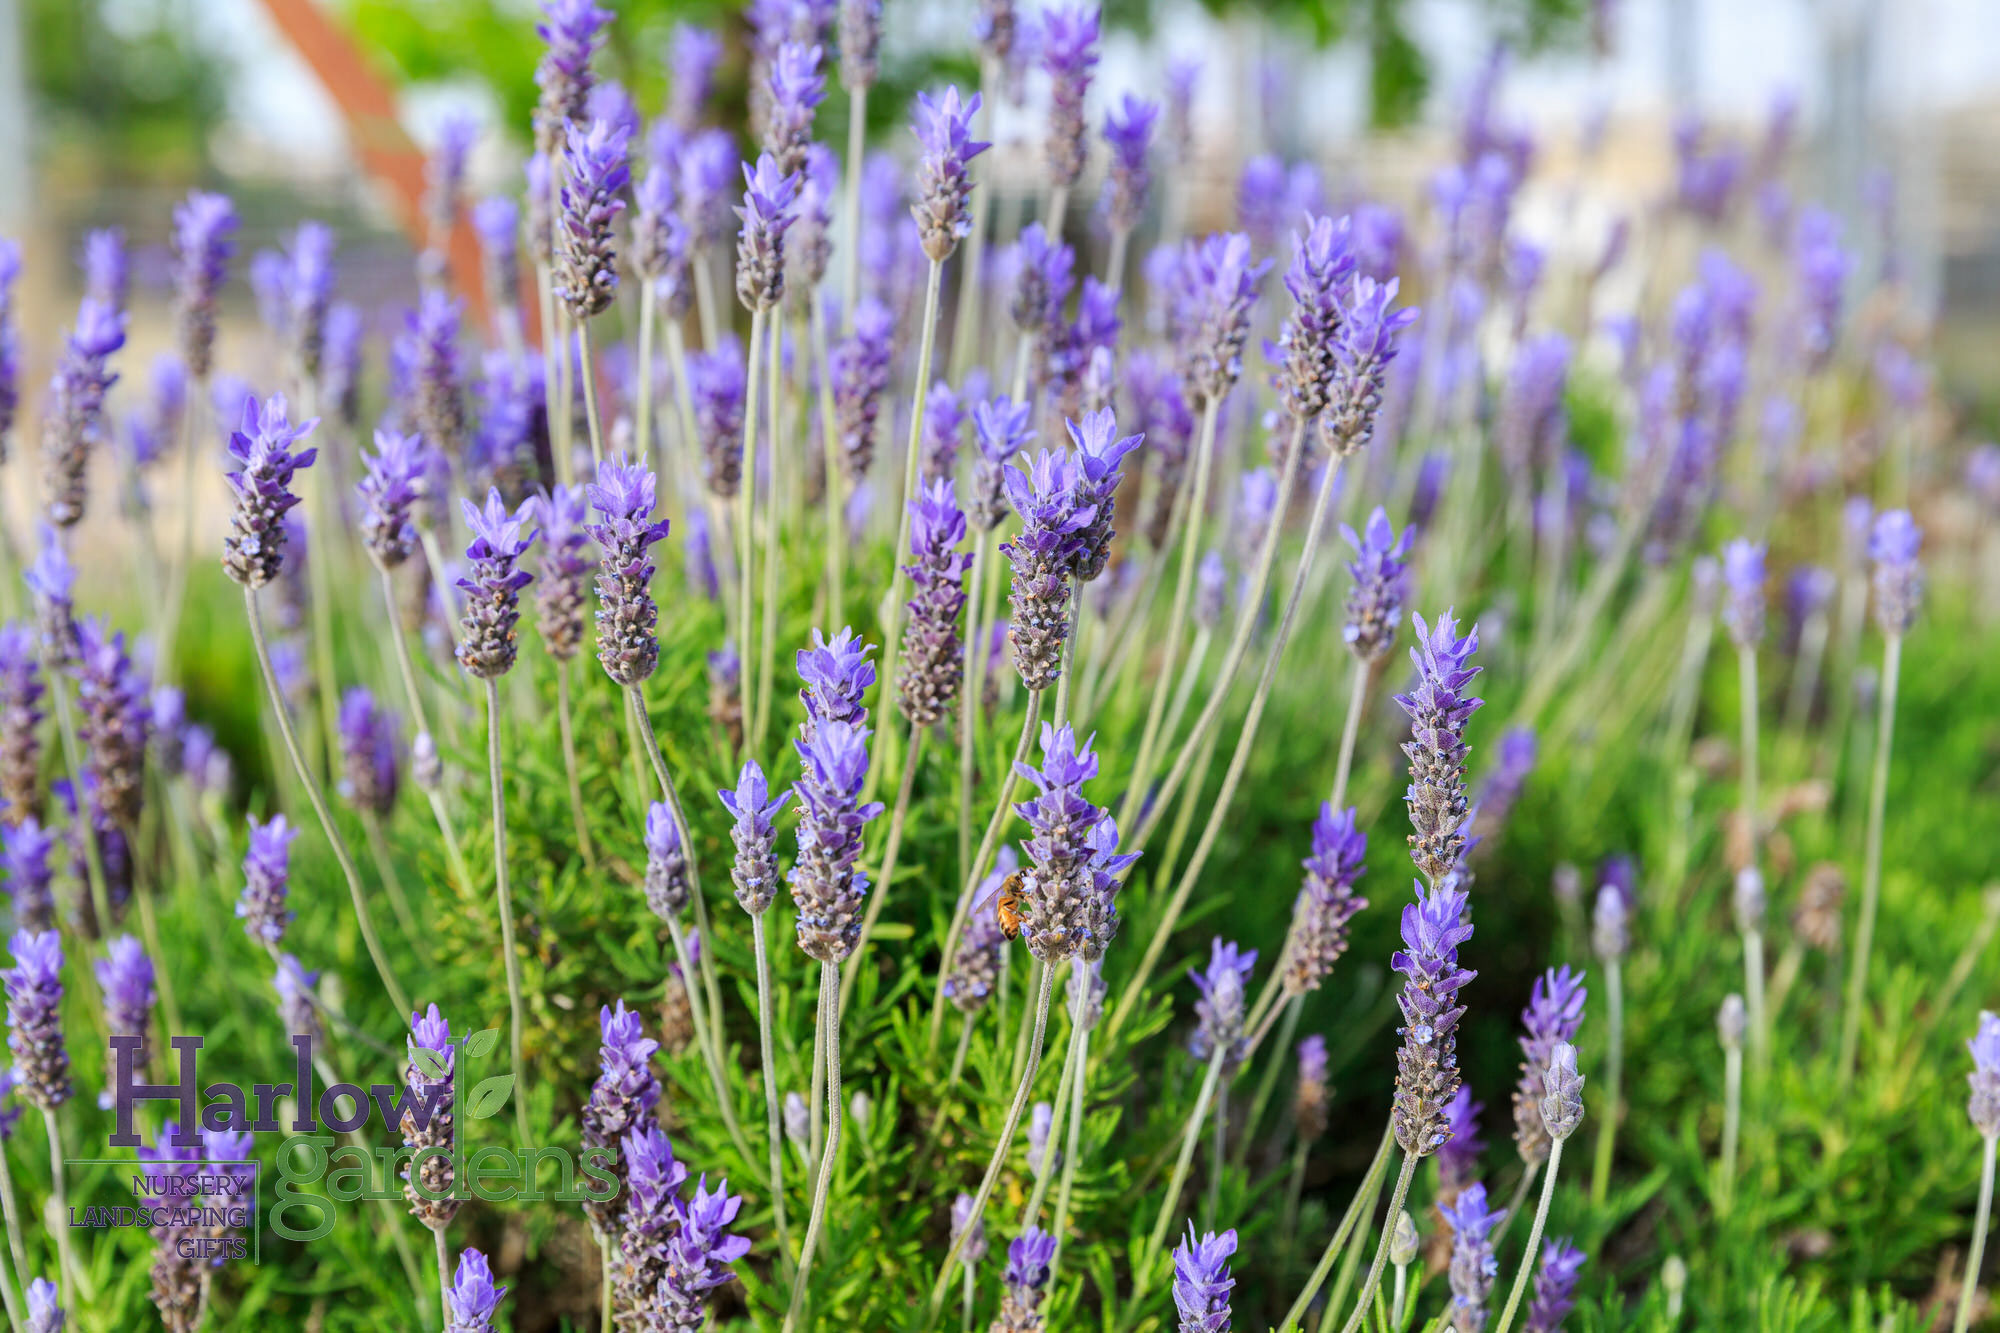 French Lavender for sale at Harlow Gardens Tucson.